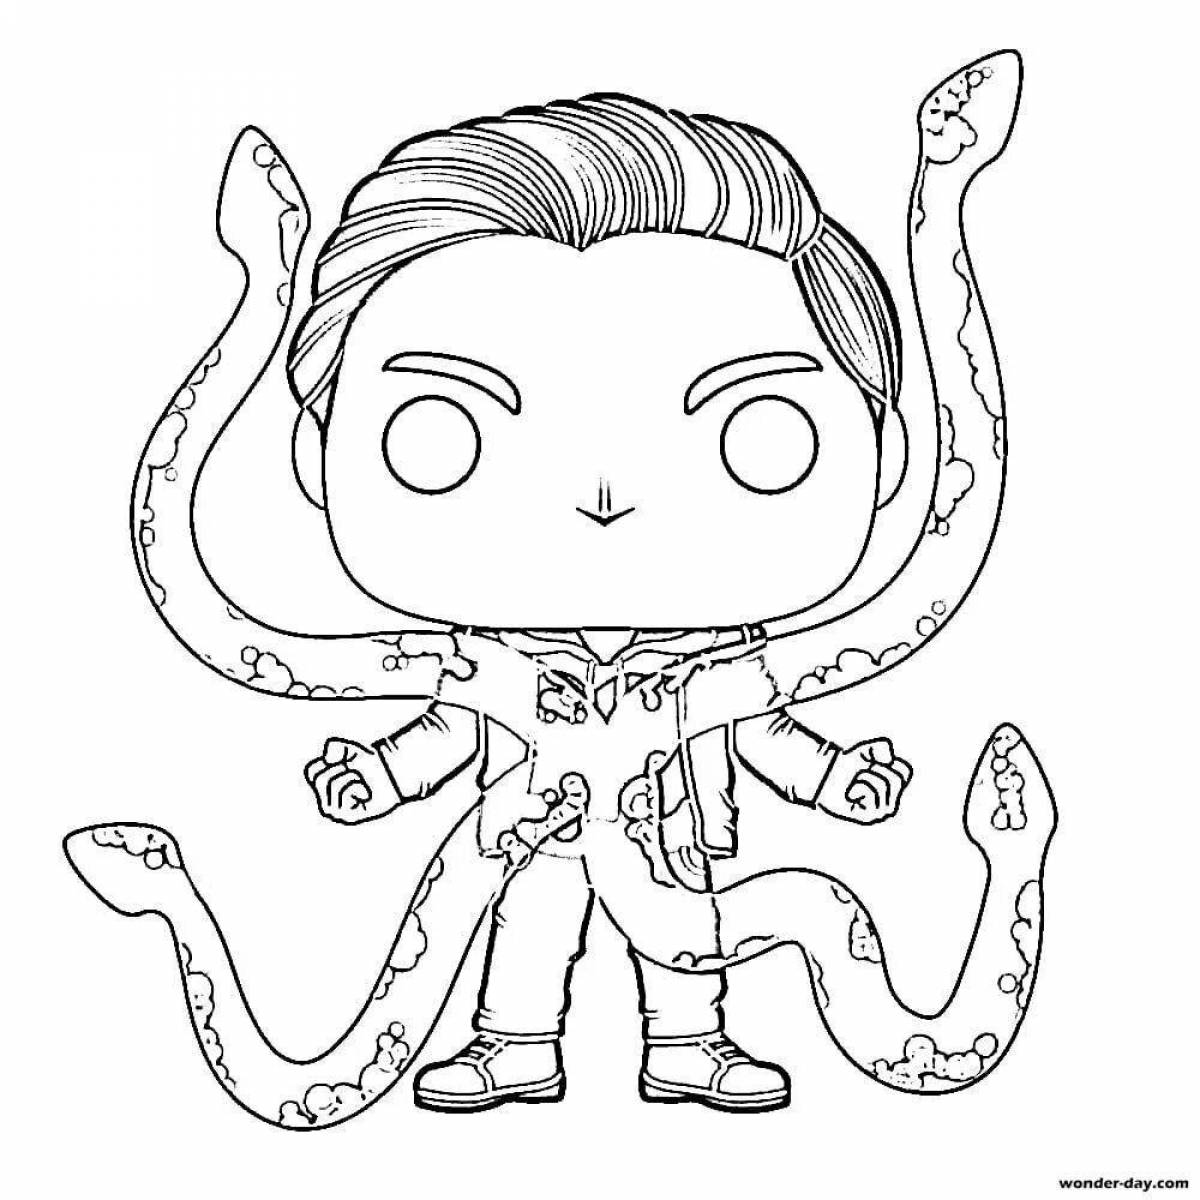 Playful funko pop coloring page